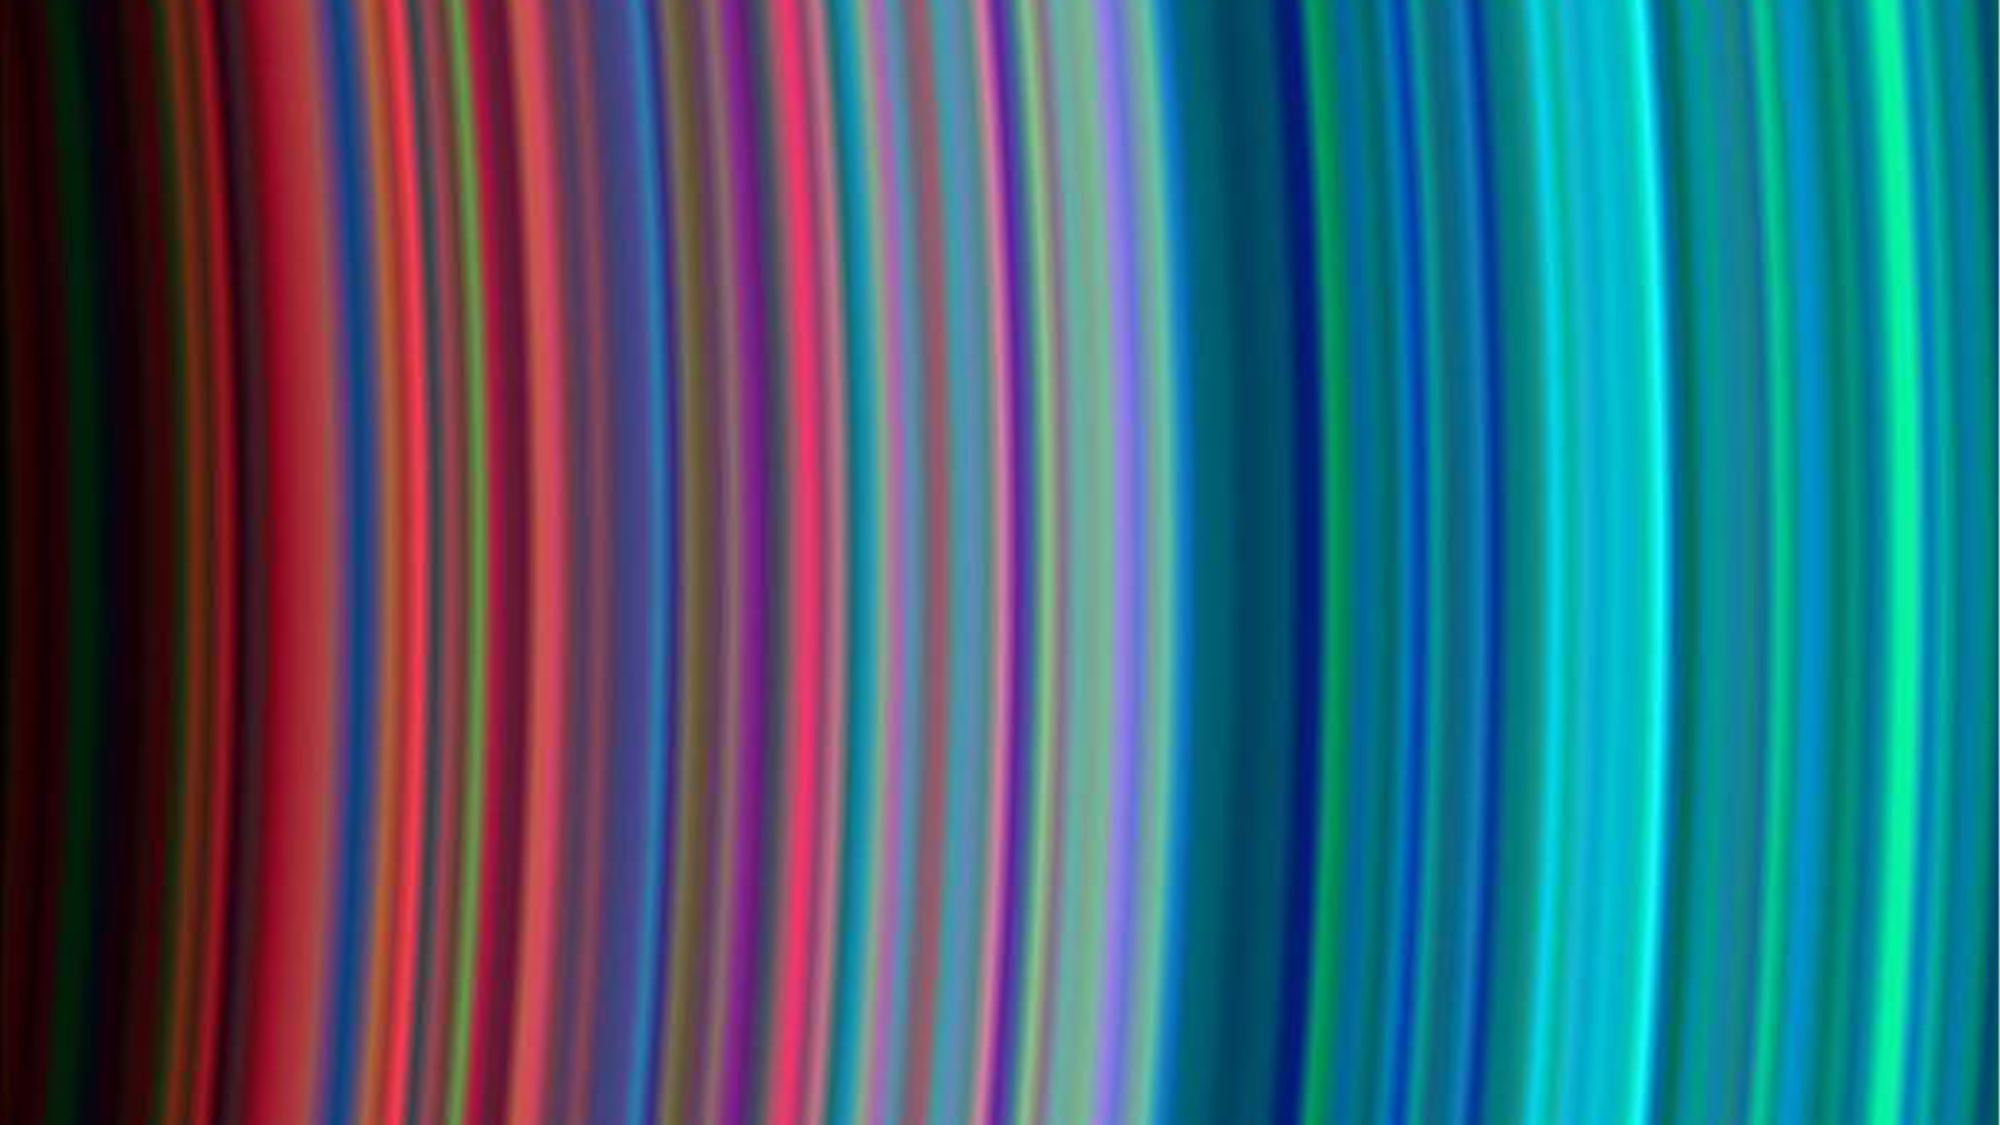 A closeup of Saturn's colorful rings. The image was taken on June 30, 2004 using the Cassini spacecraft’s Ultraviolet Imaging Spectrograph as it entered the planet’s orbit.